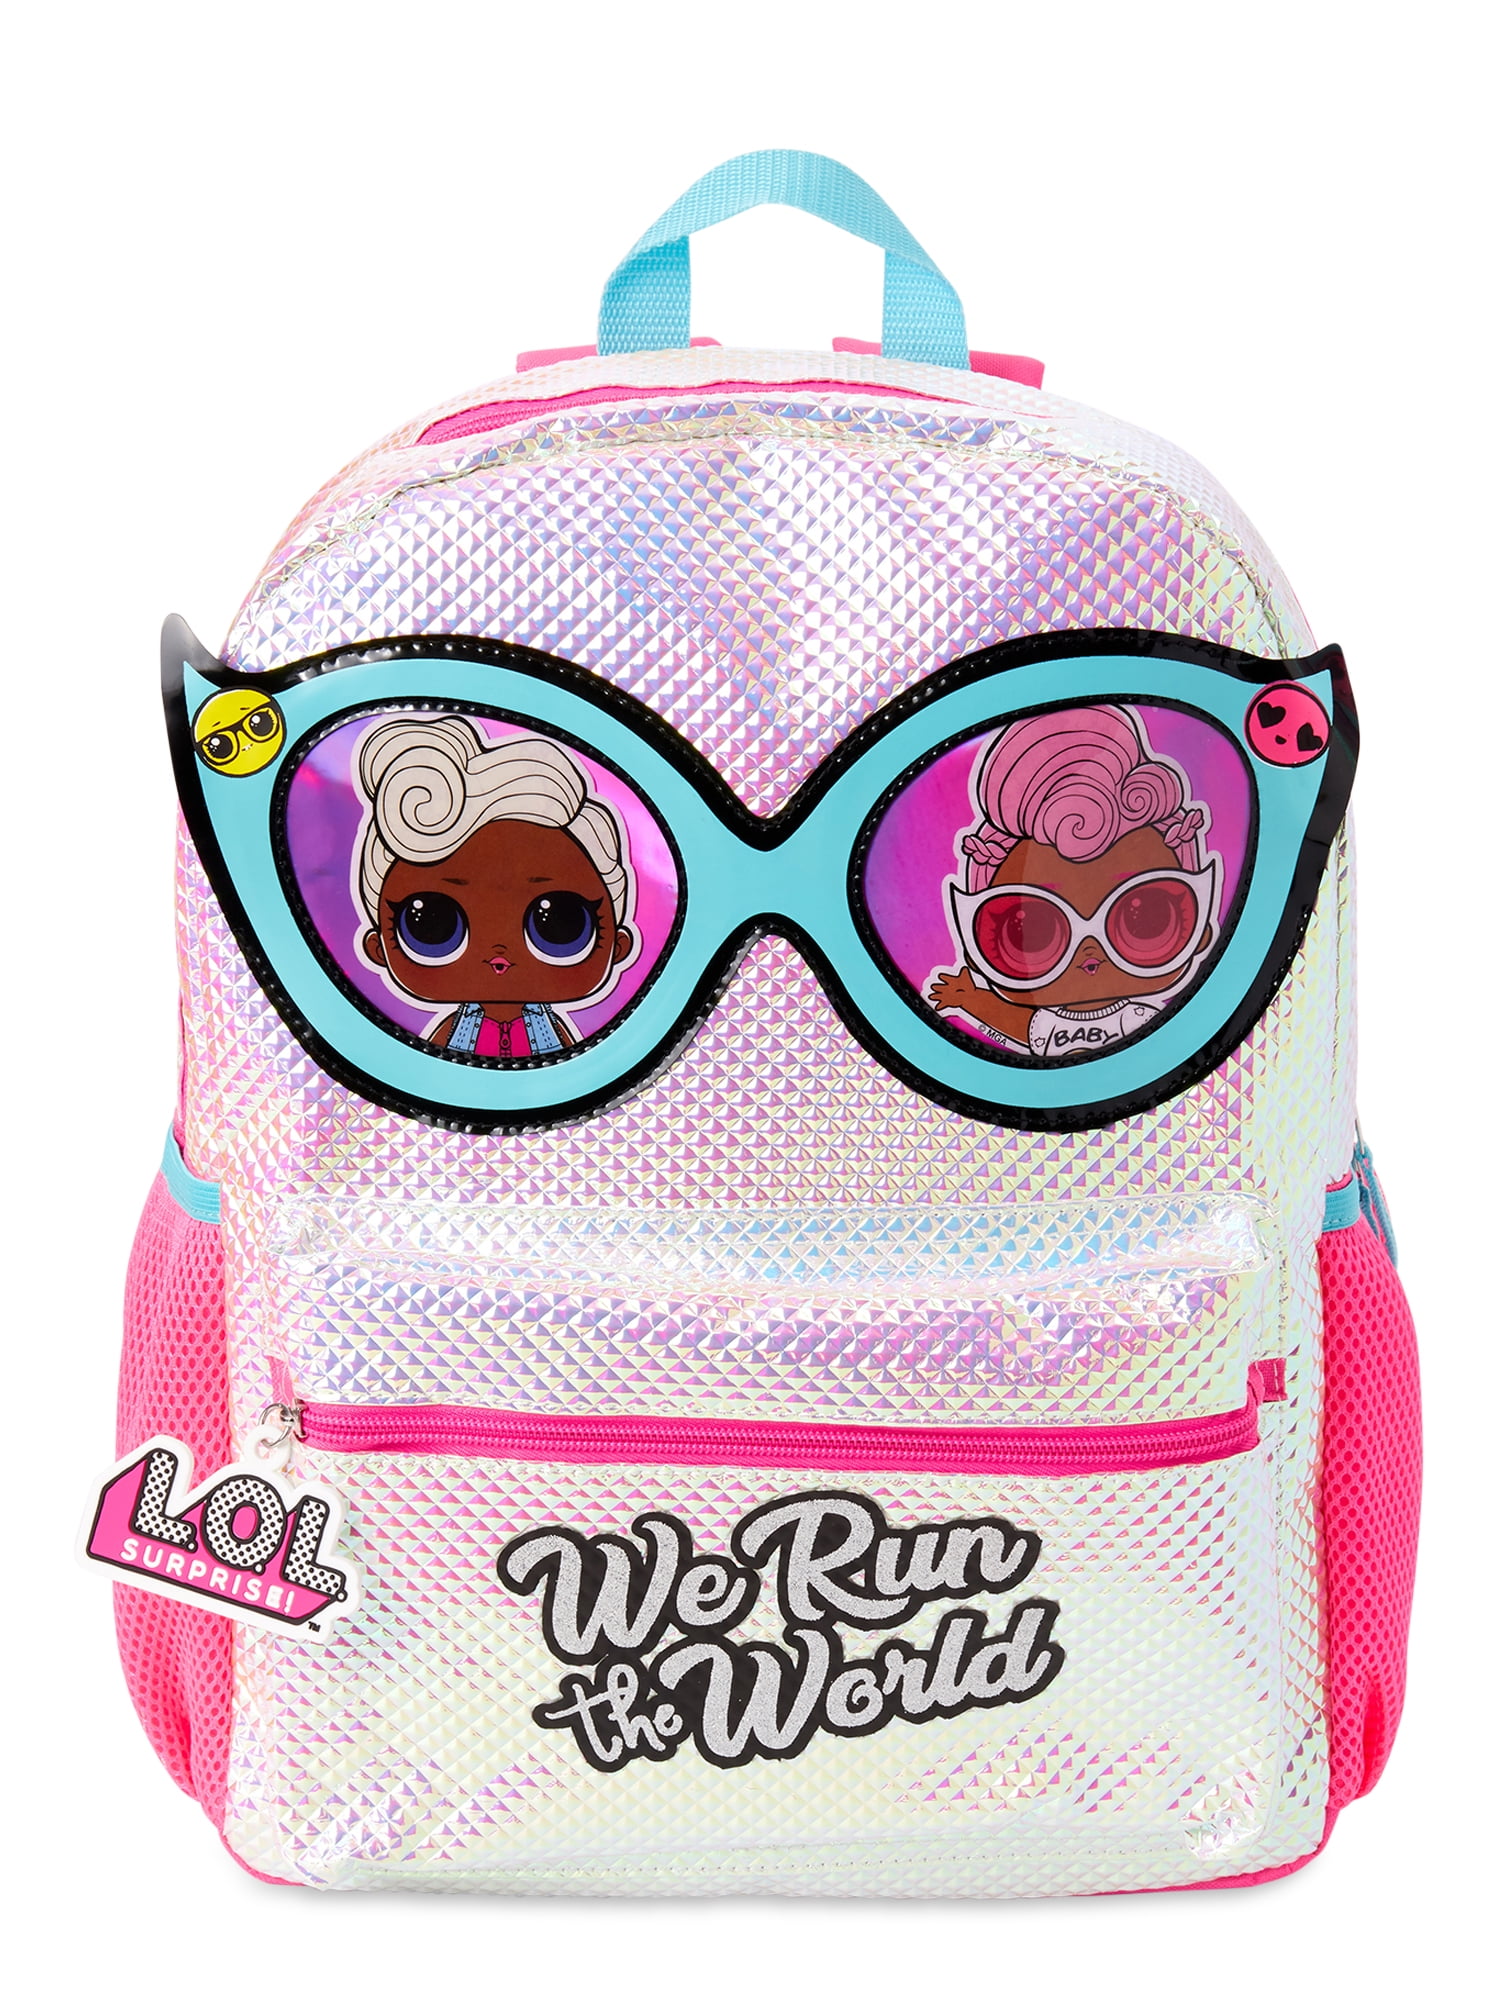 L O L Surprise Girls We Run The World Backpack aacf75b0 4dd6 49cc 9d1d b066aca5f2dd.e9e99eca3abf82c69ae301dd0ec44cff